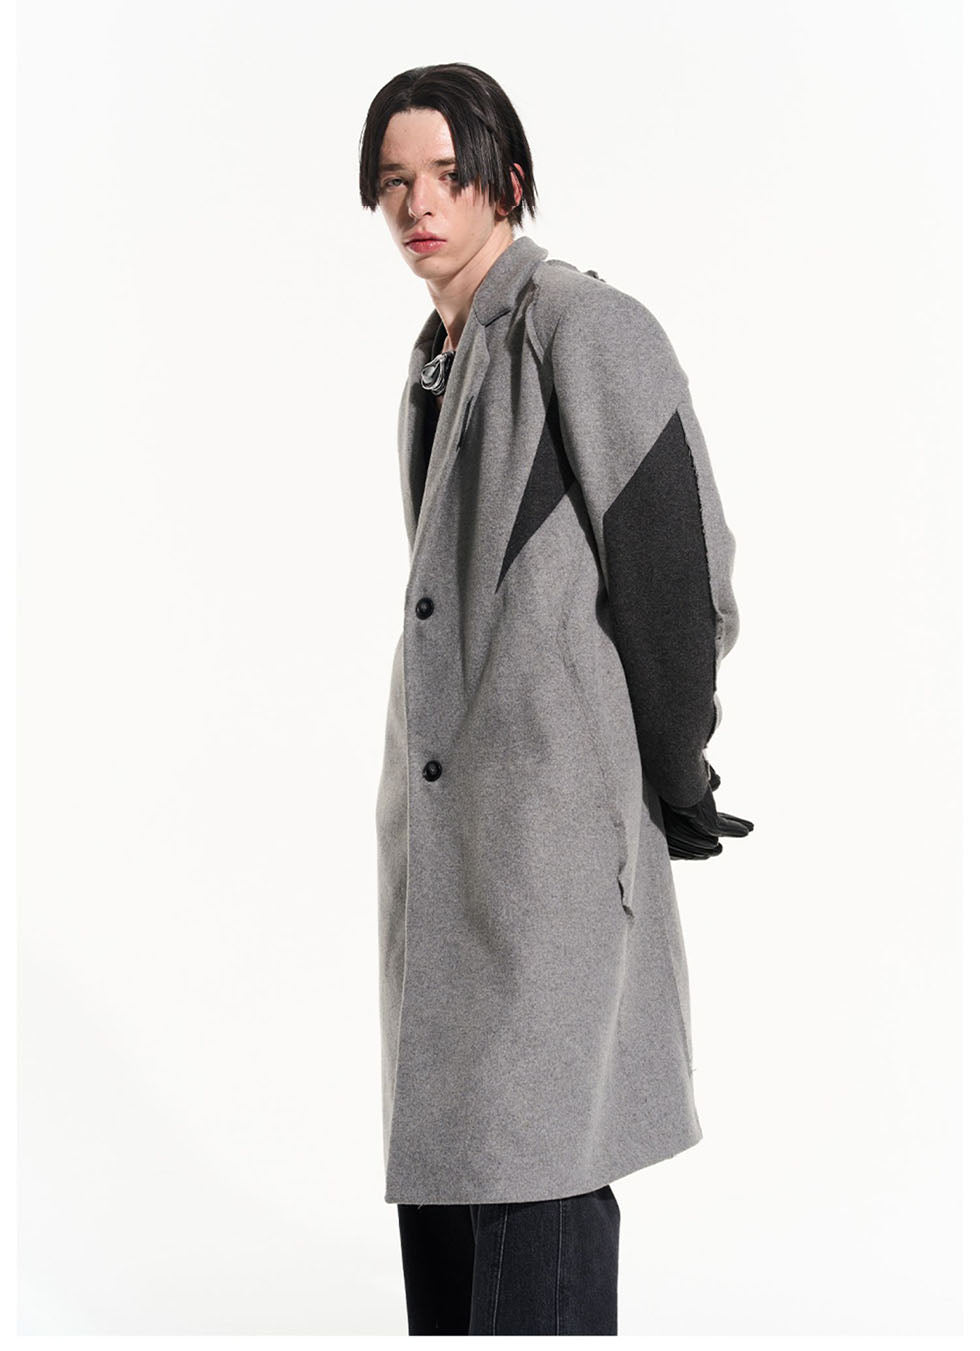 Contrast color stitching mid-length wool coat